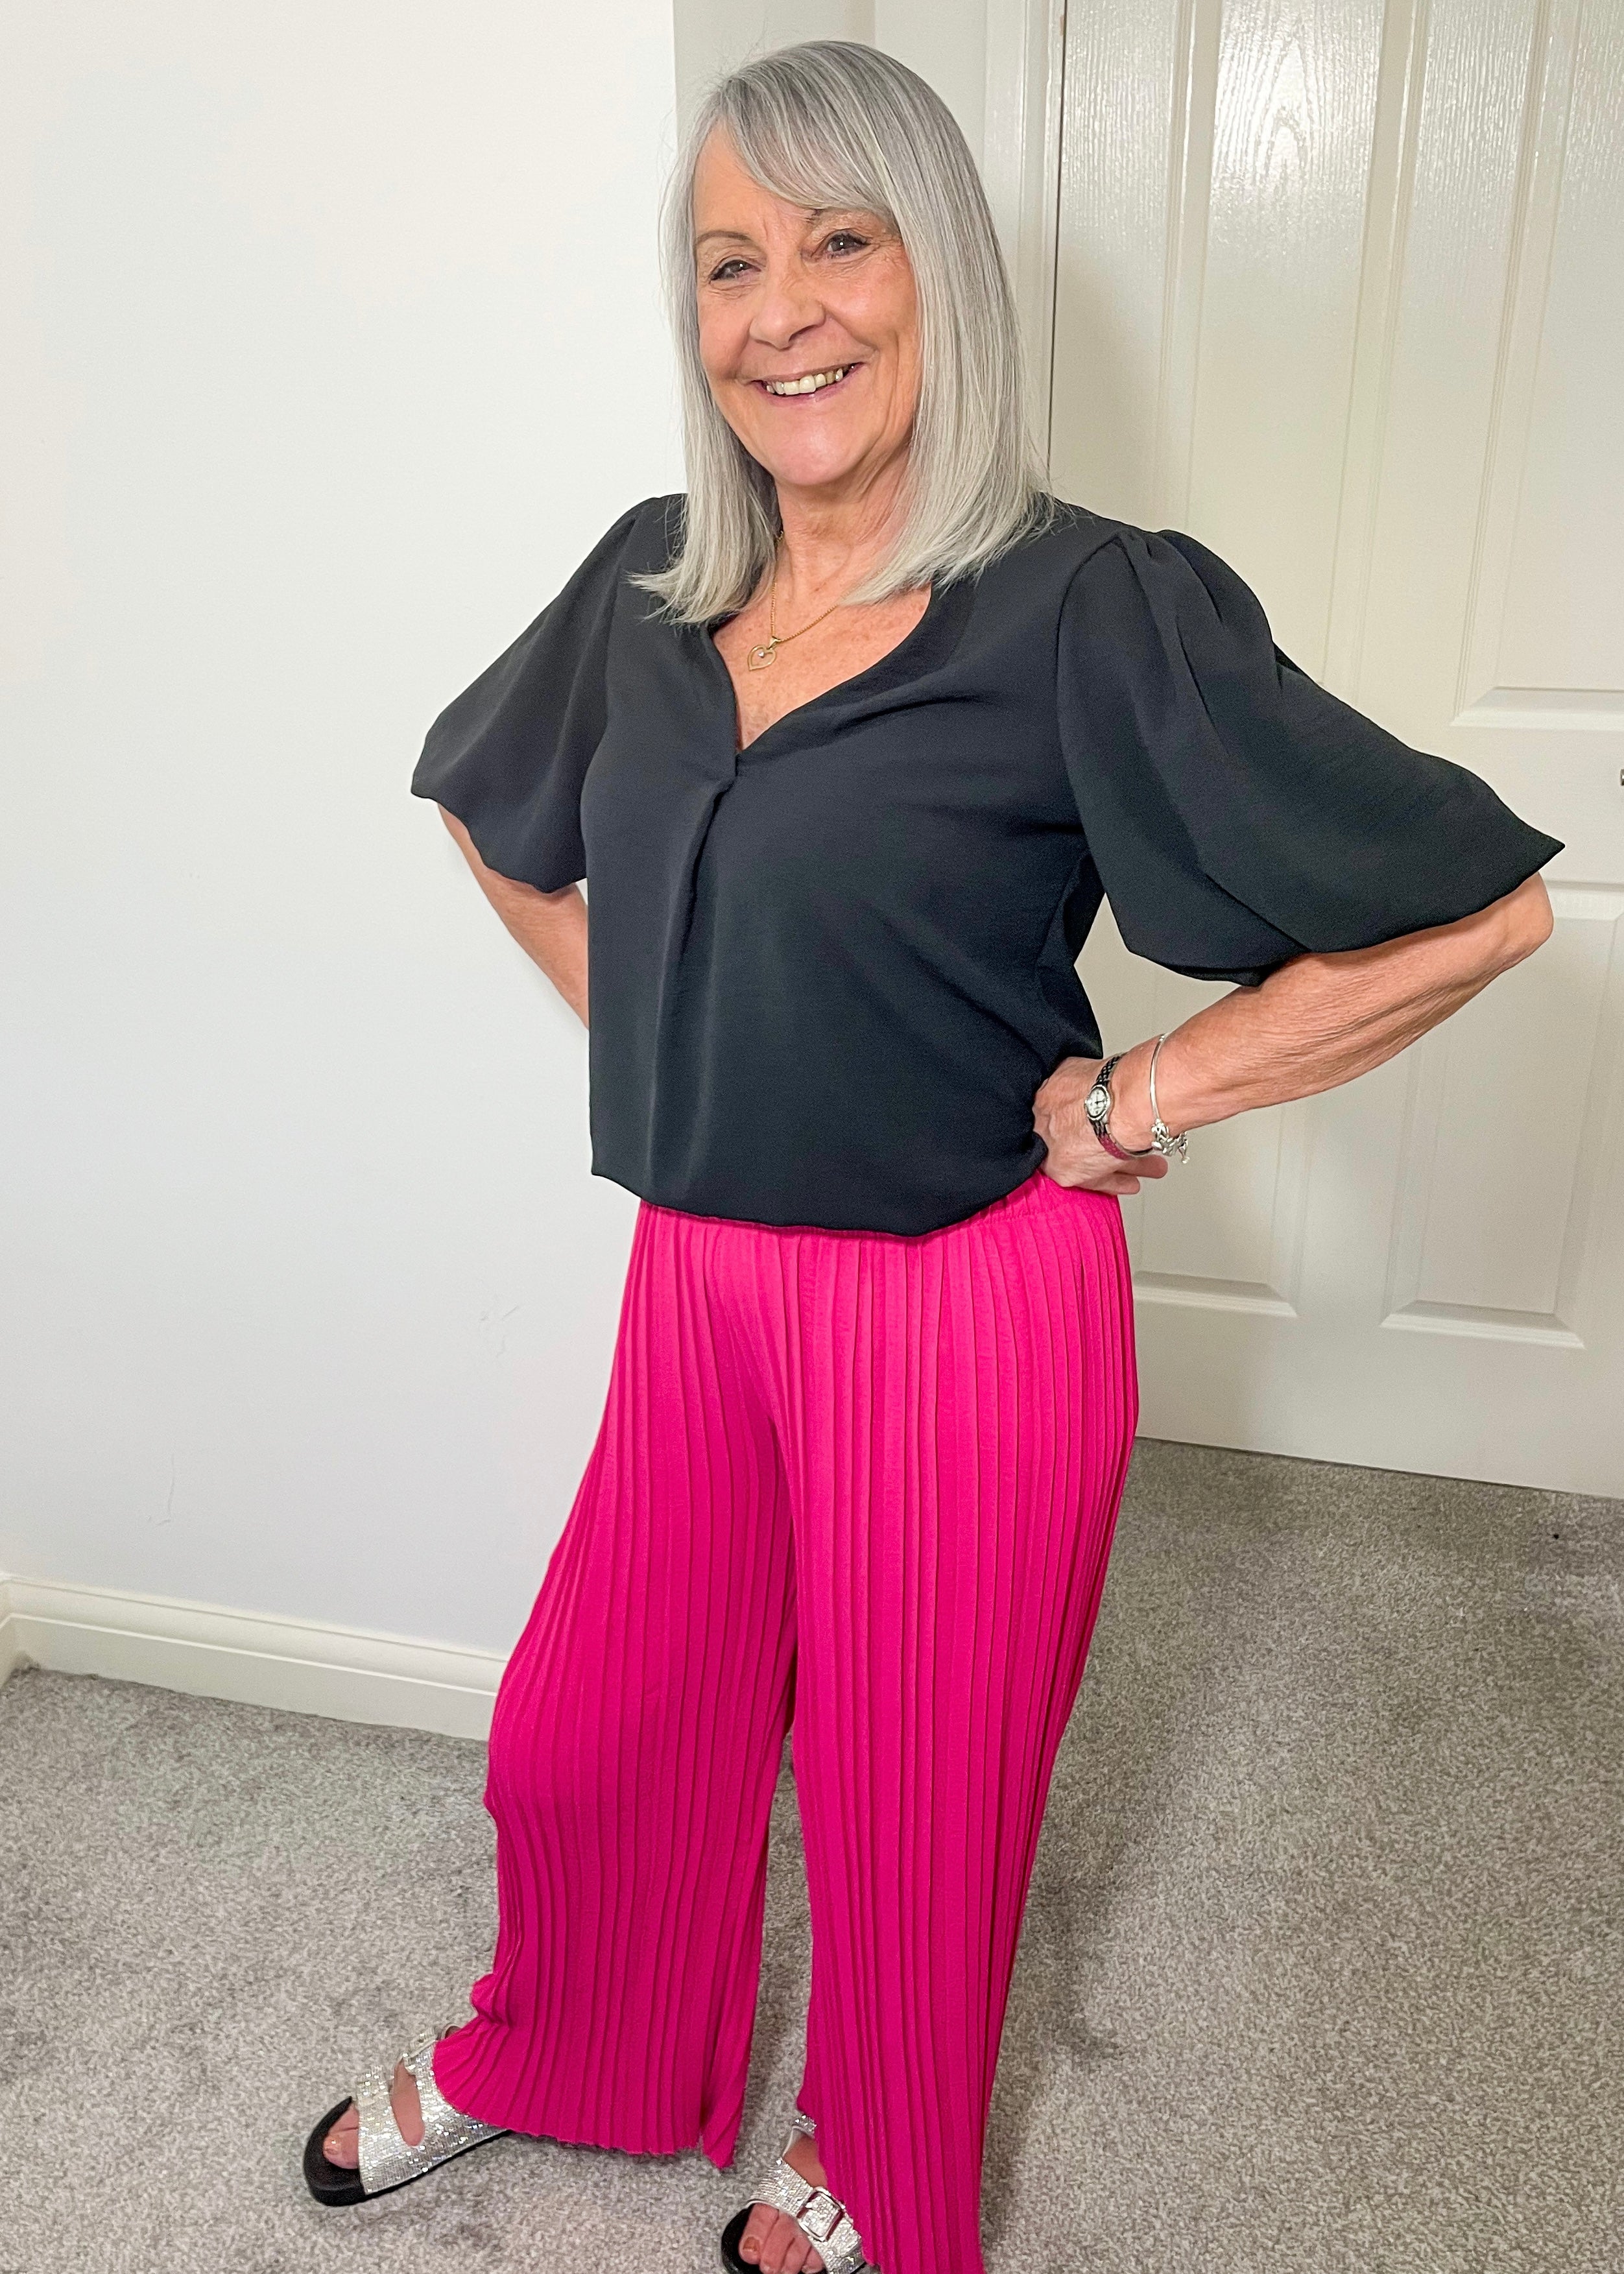 Casual Pink Trousers and White Top Outfit – JacquardFlower